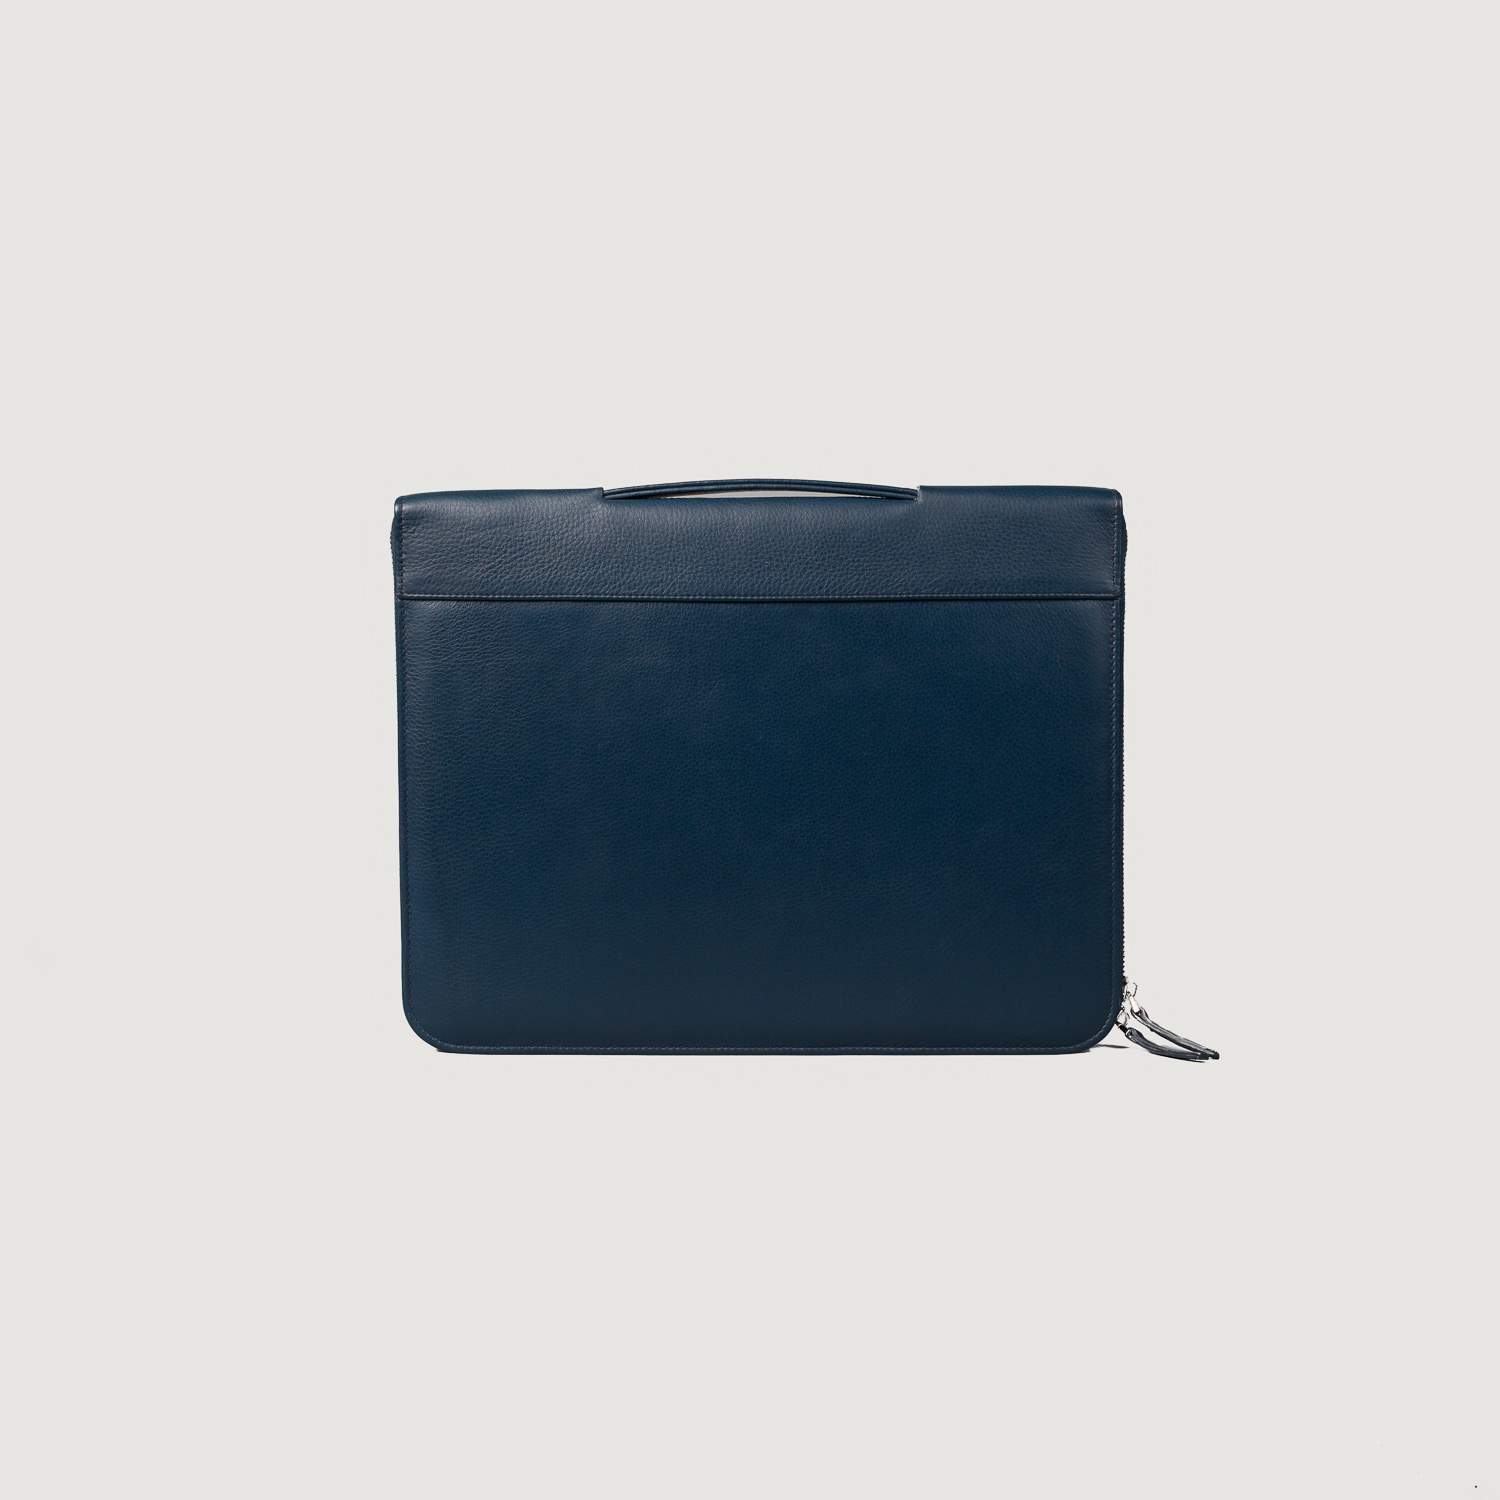 The Eclectic Midnight Blue Leather Folio Organizer